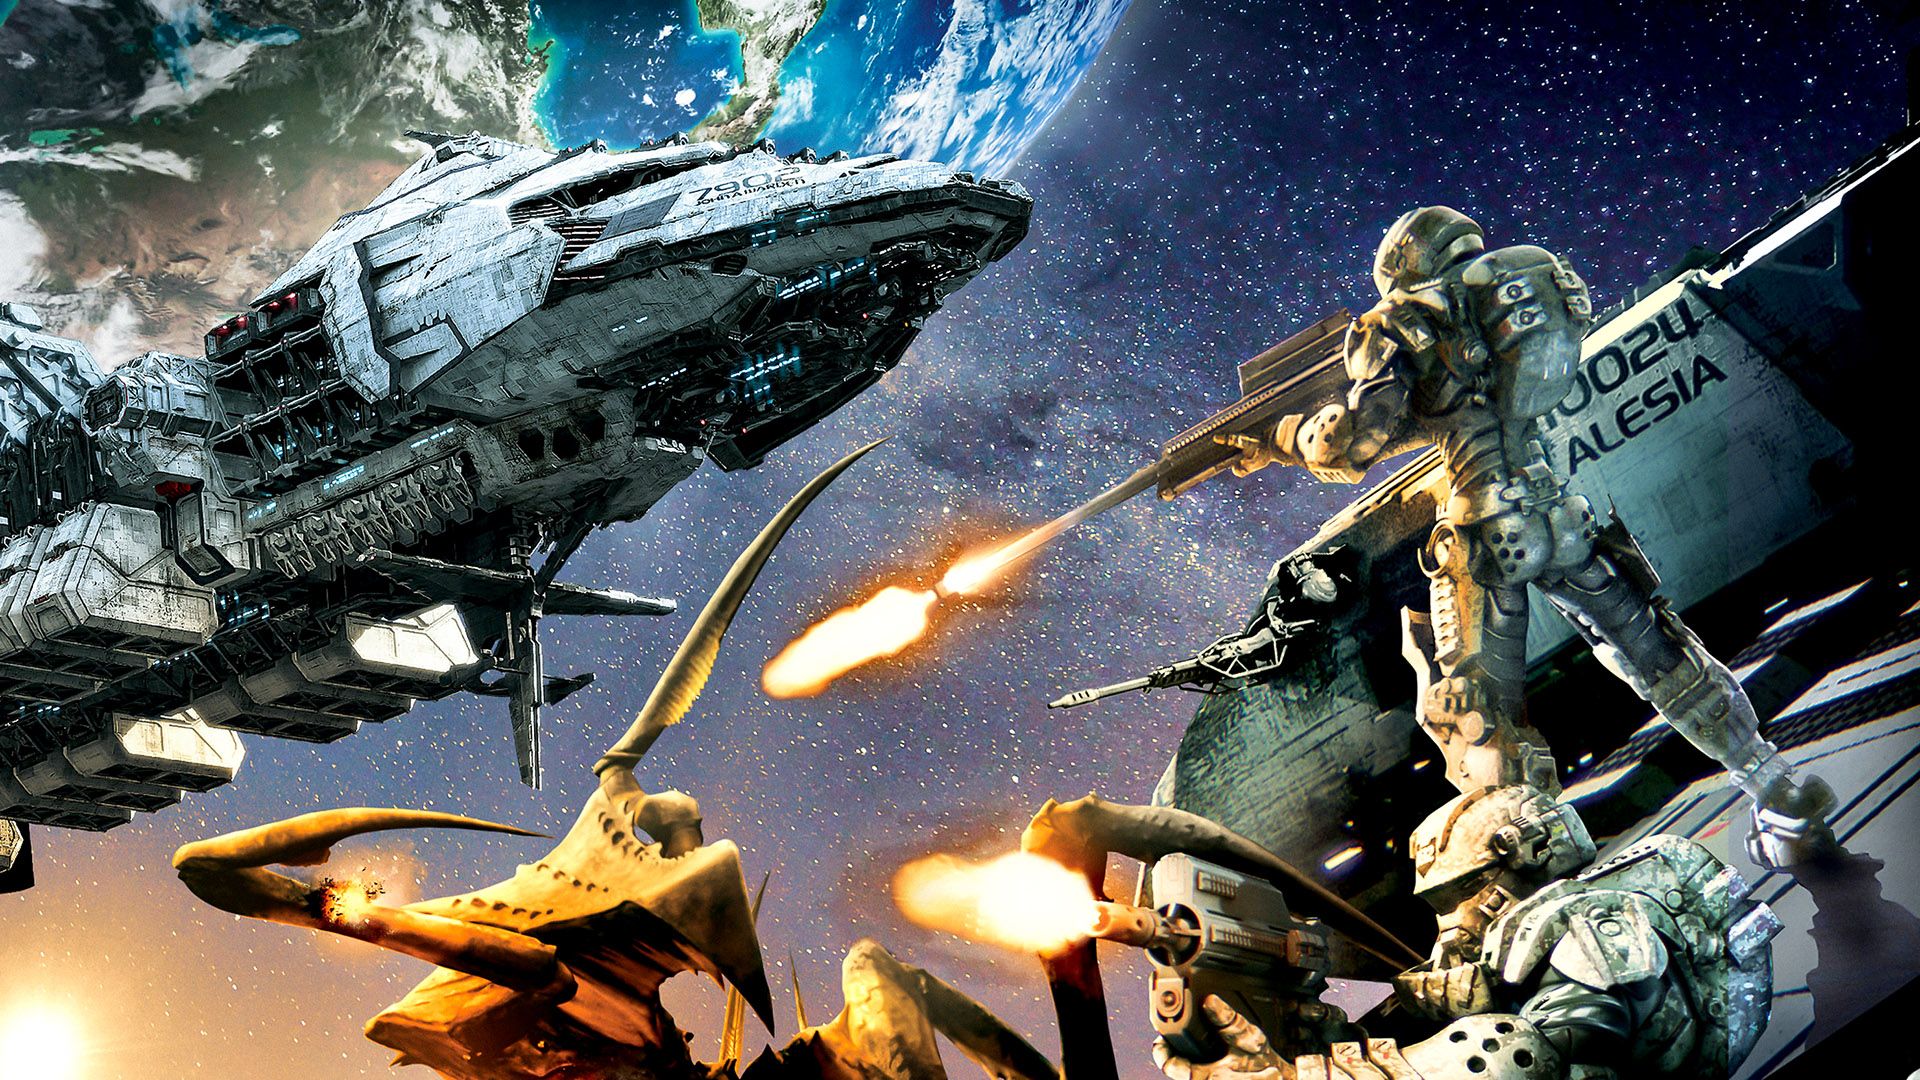 Starship Troopers: Invasion background